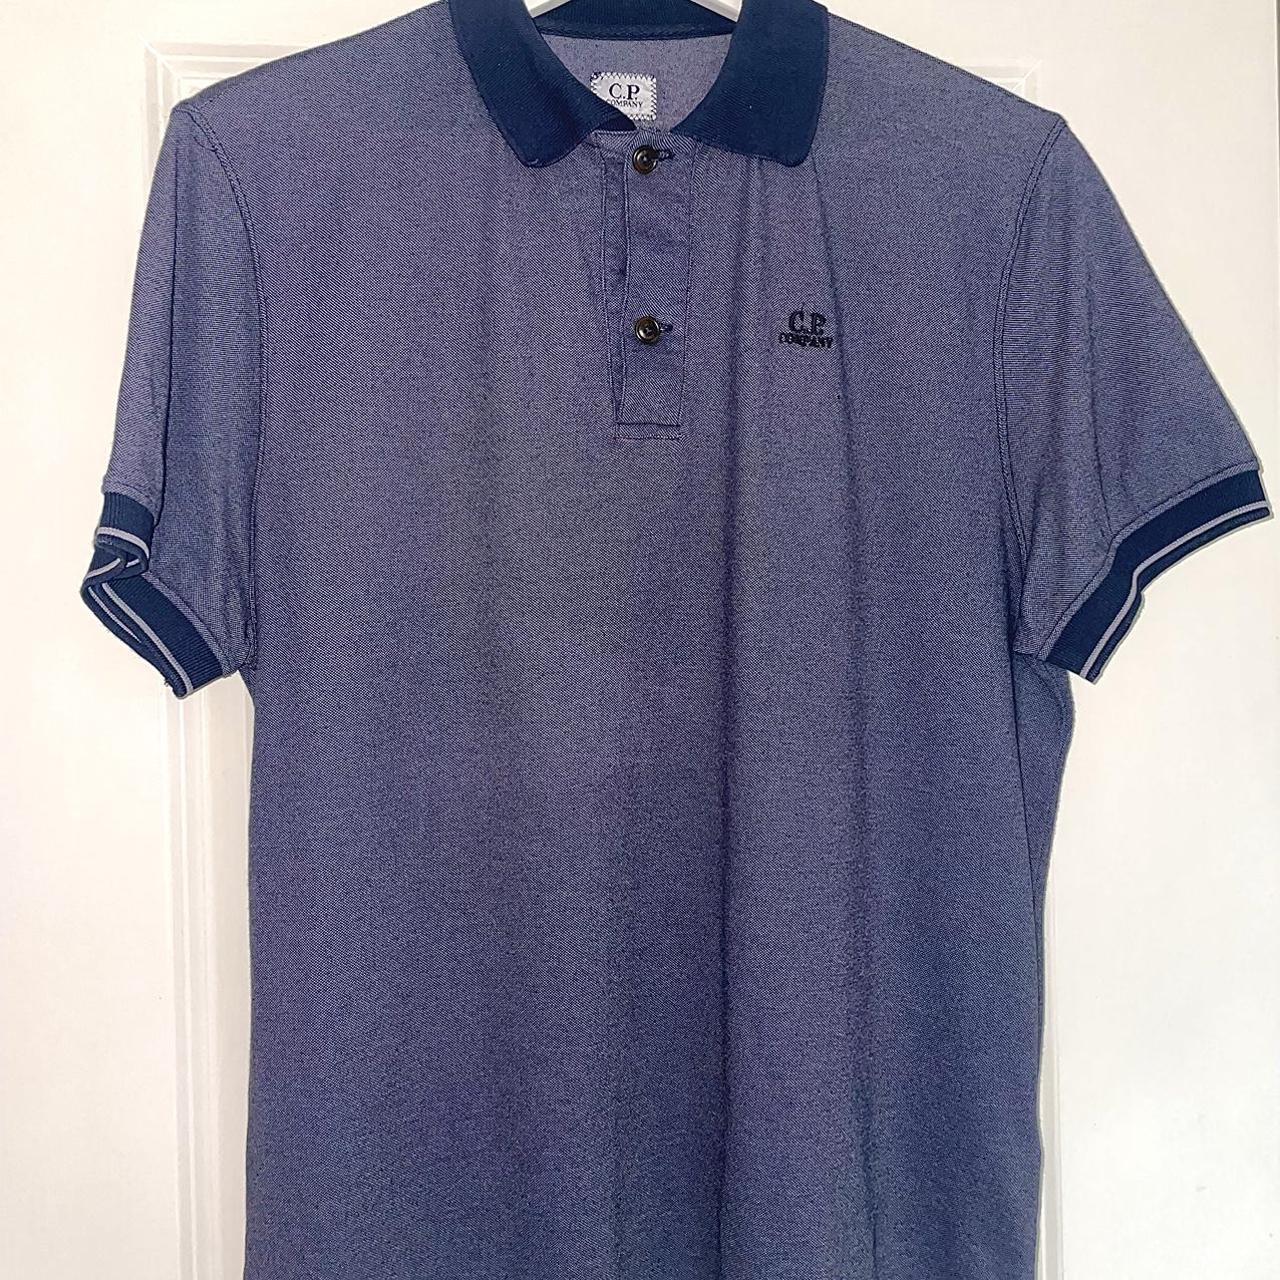 CP company polo shirt mint condition hardy worn... - Depop